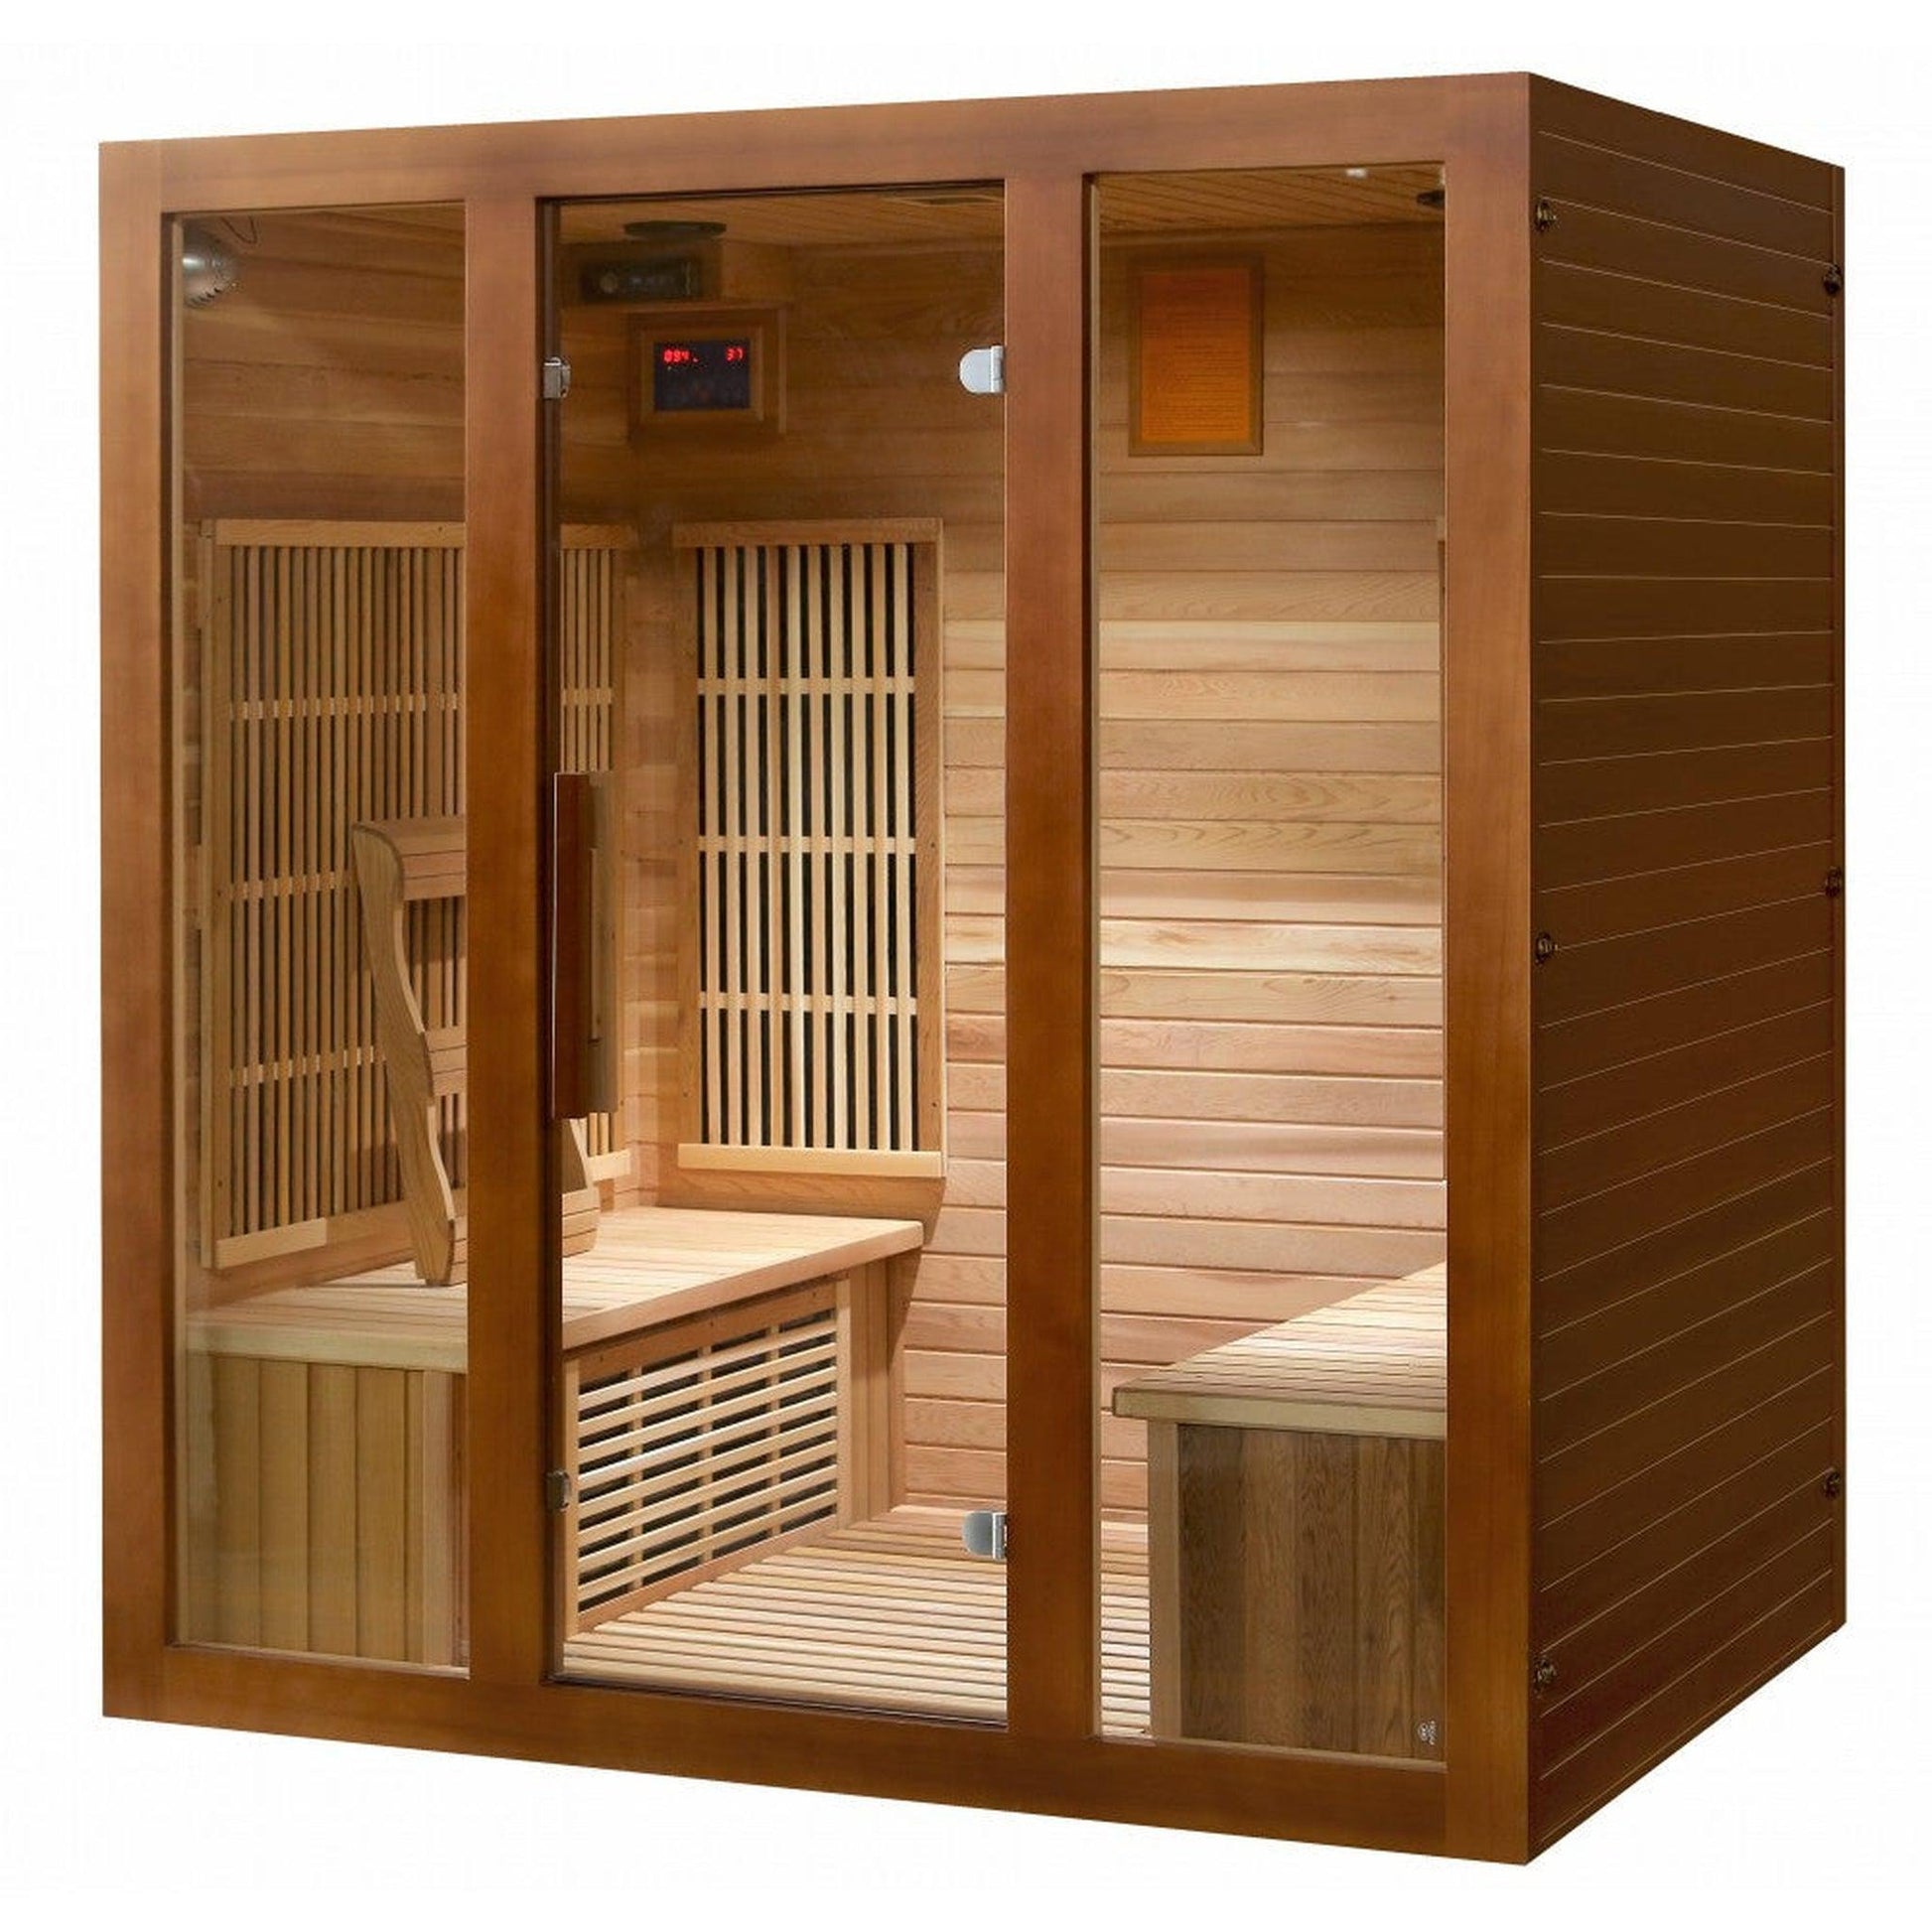 SunRay Roslyn 4-Person Indoor Infrared Sauna In Cedar Wood With Carbon Nano Heaters